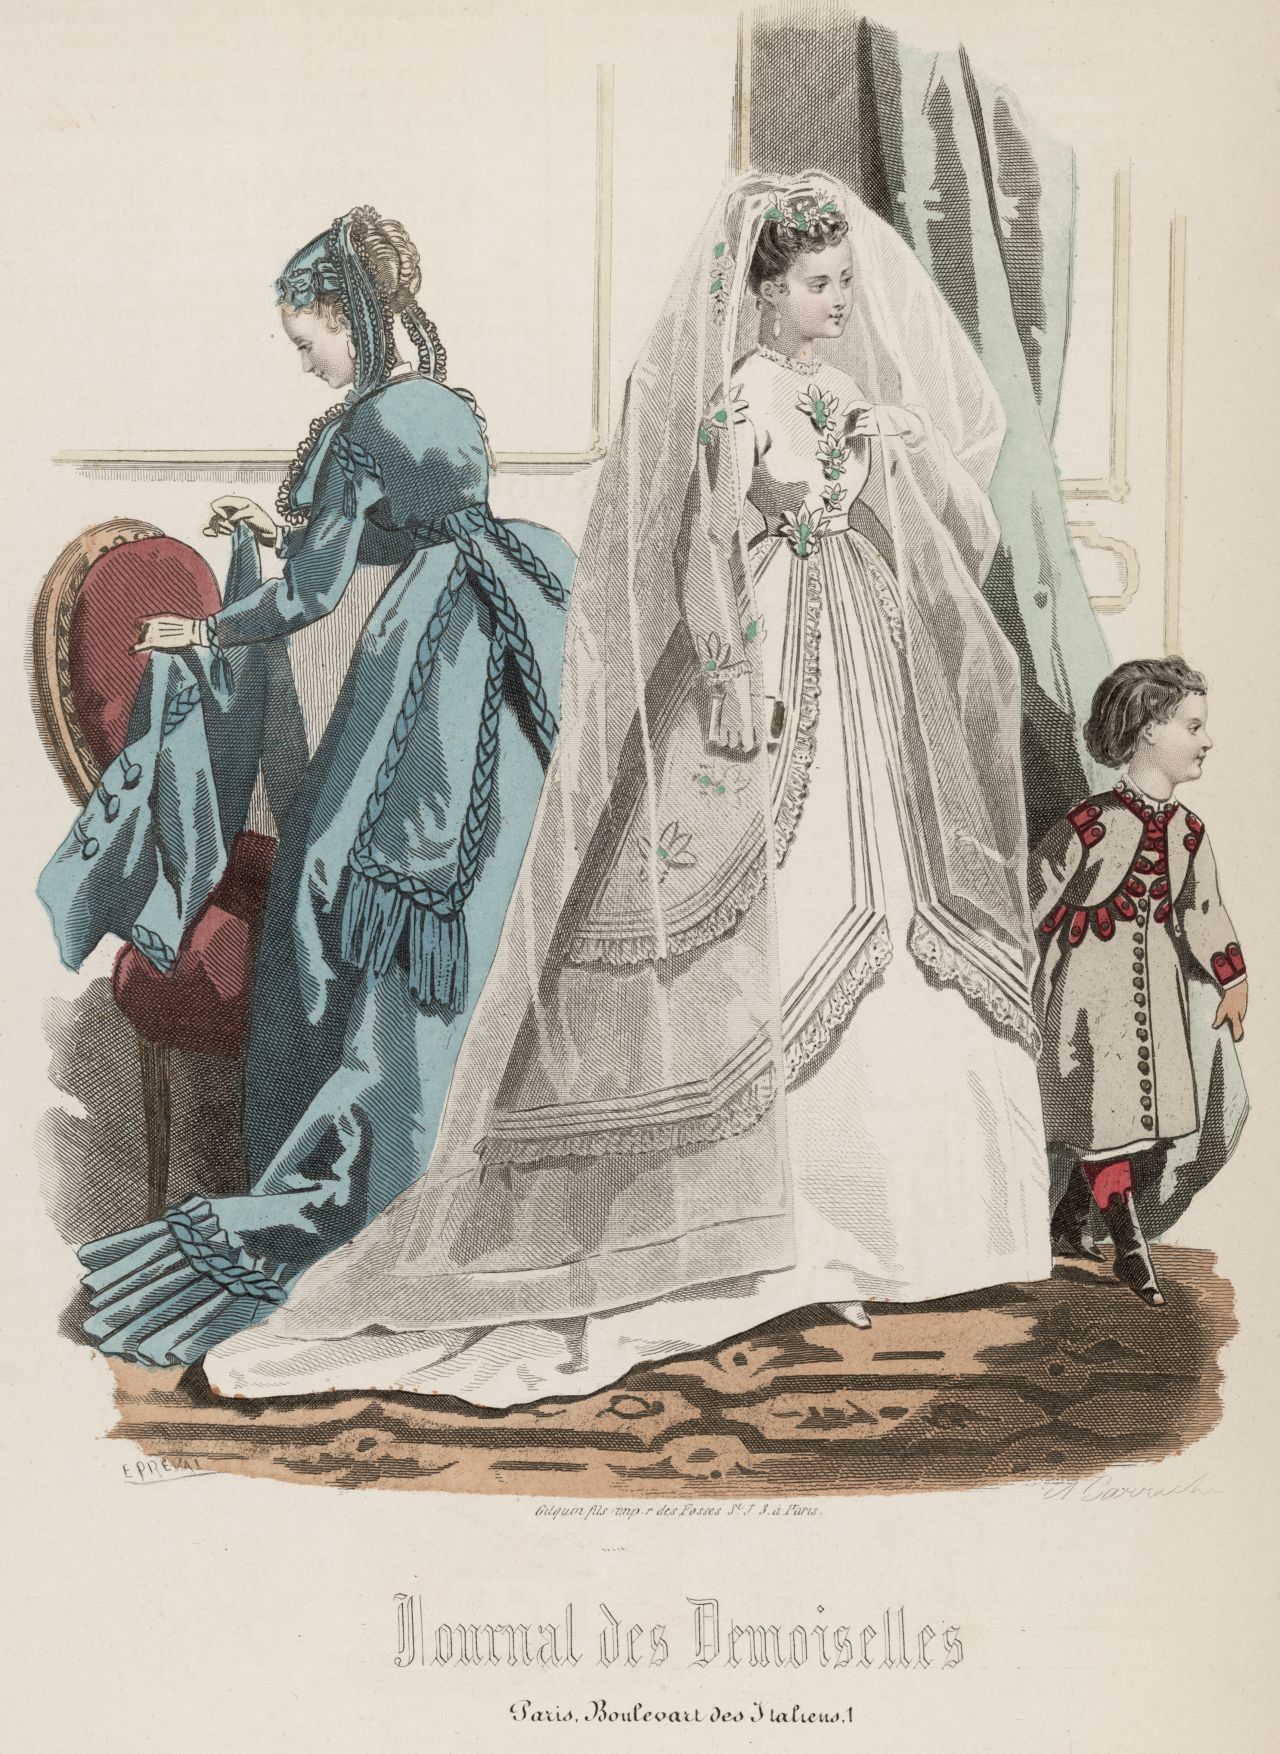 A bride wears white in the April 1868 issue of the Journal des Demoiselles, an early French fashion magazine.